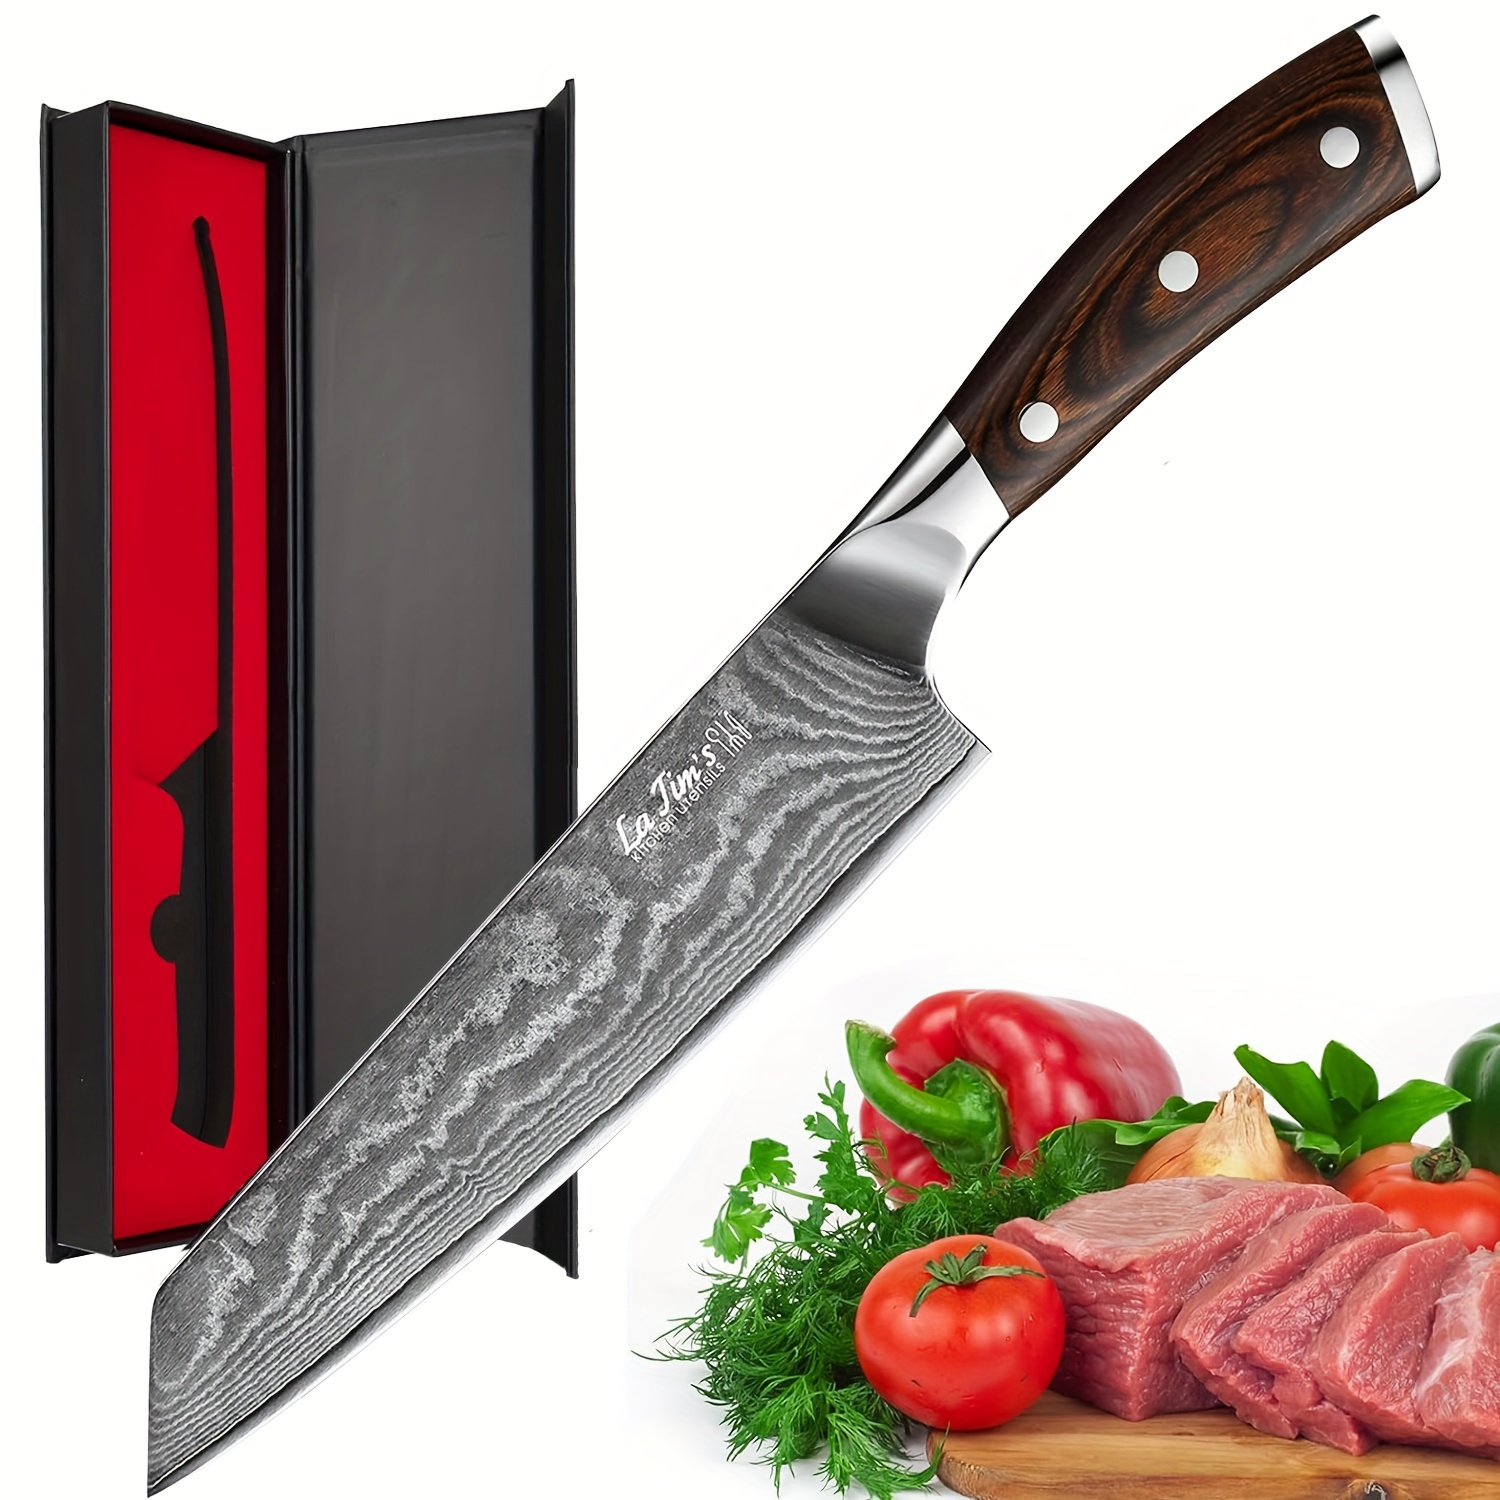 

Latim Damascus Professional Chef Knife, 8 Inch Knife Japanese Vg10 Steel Blade With Ergonomic Handle And Gift Box